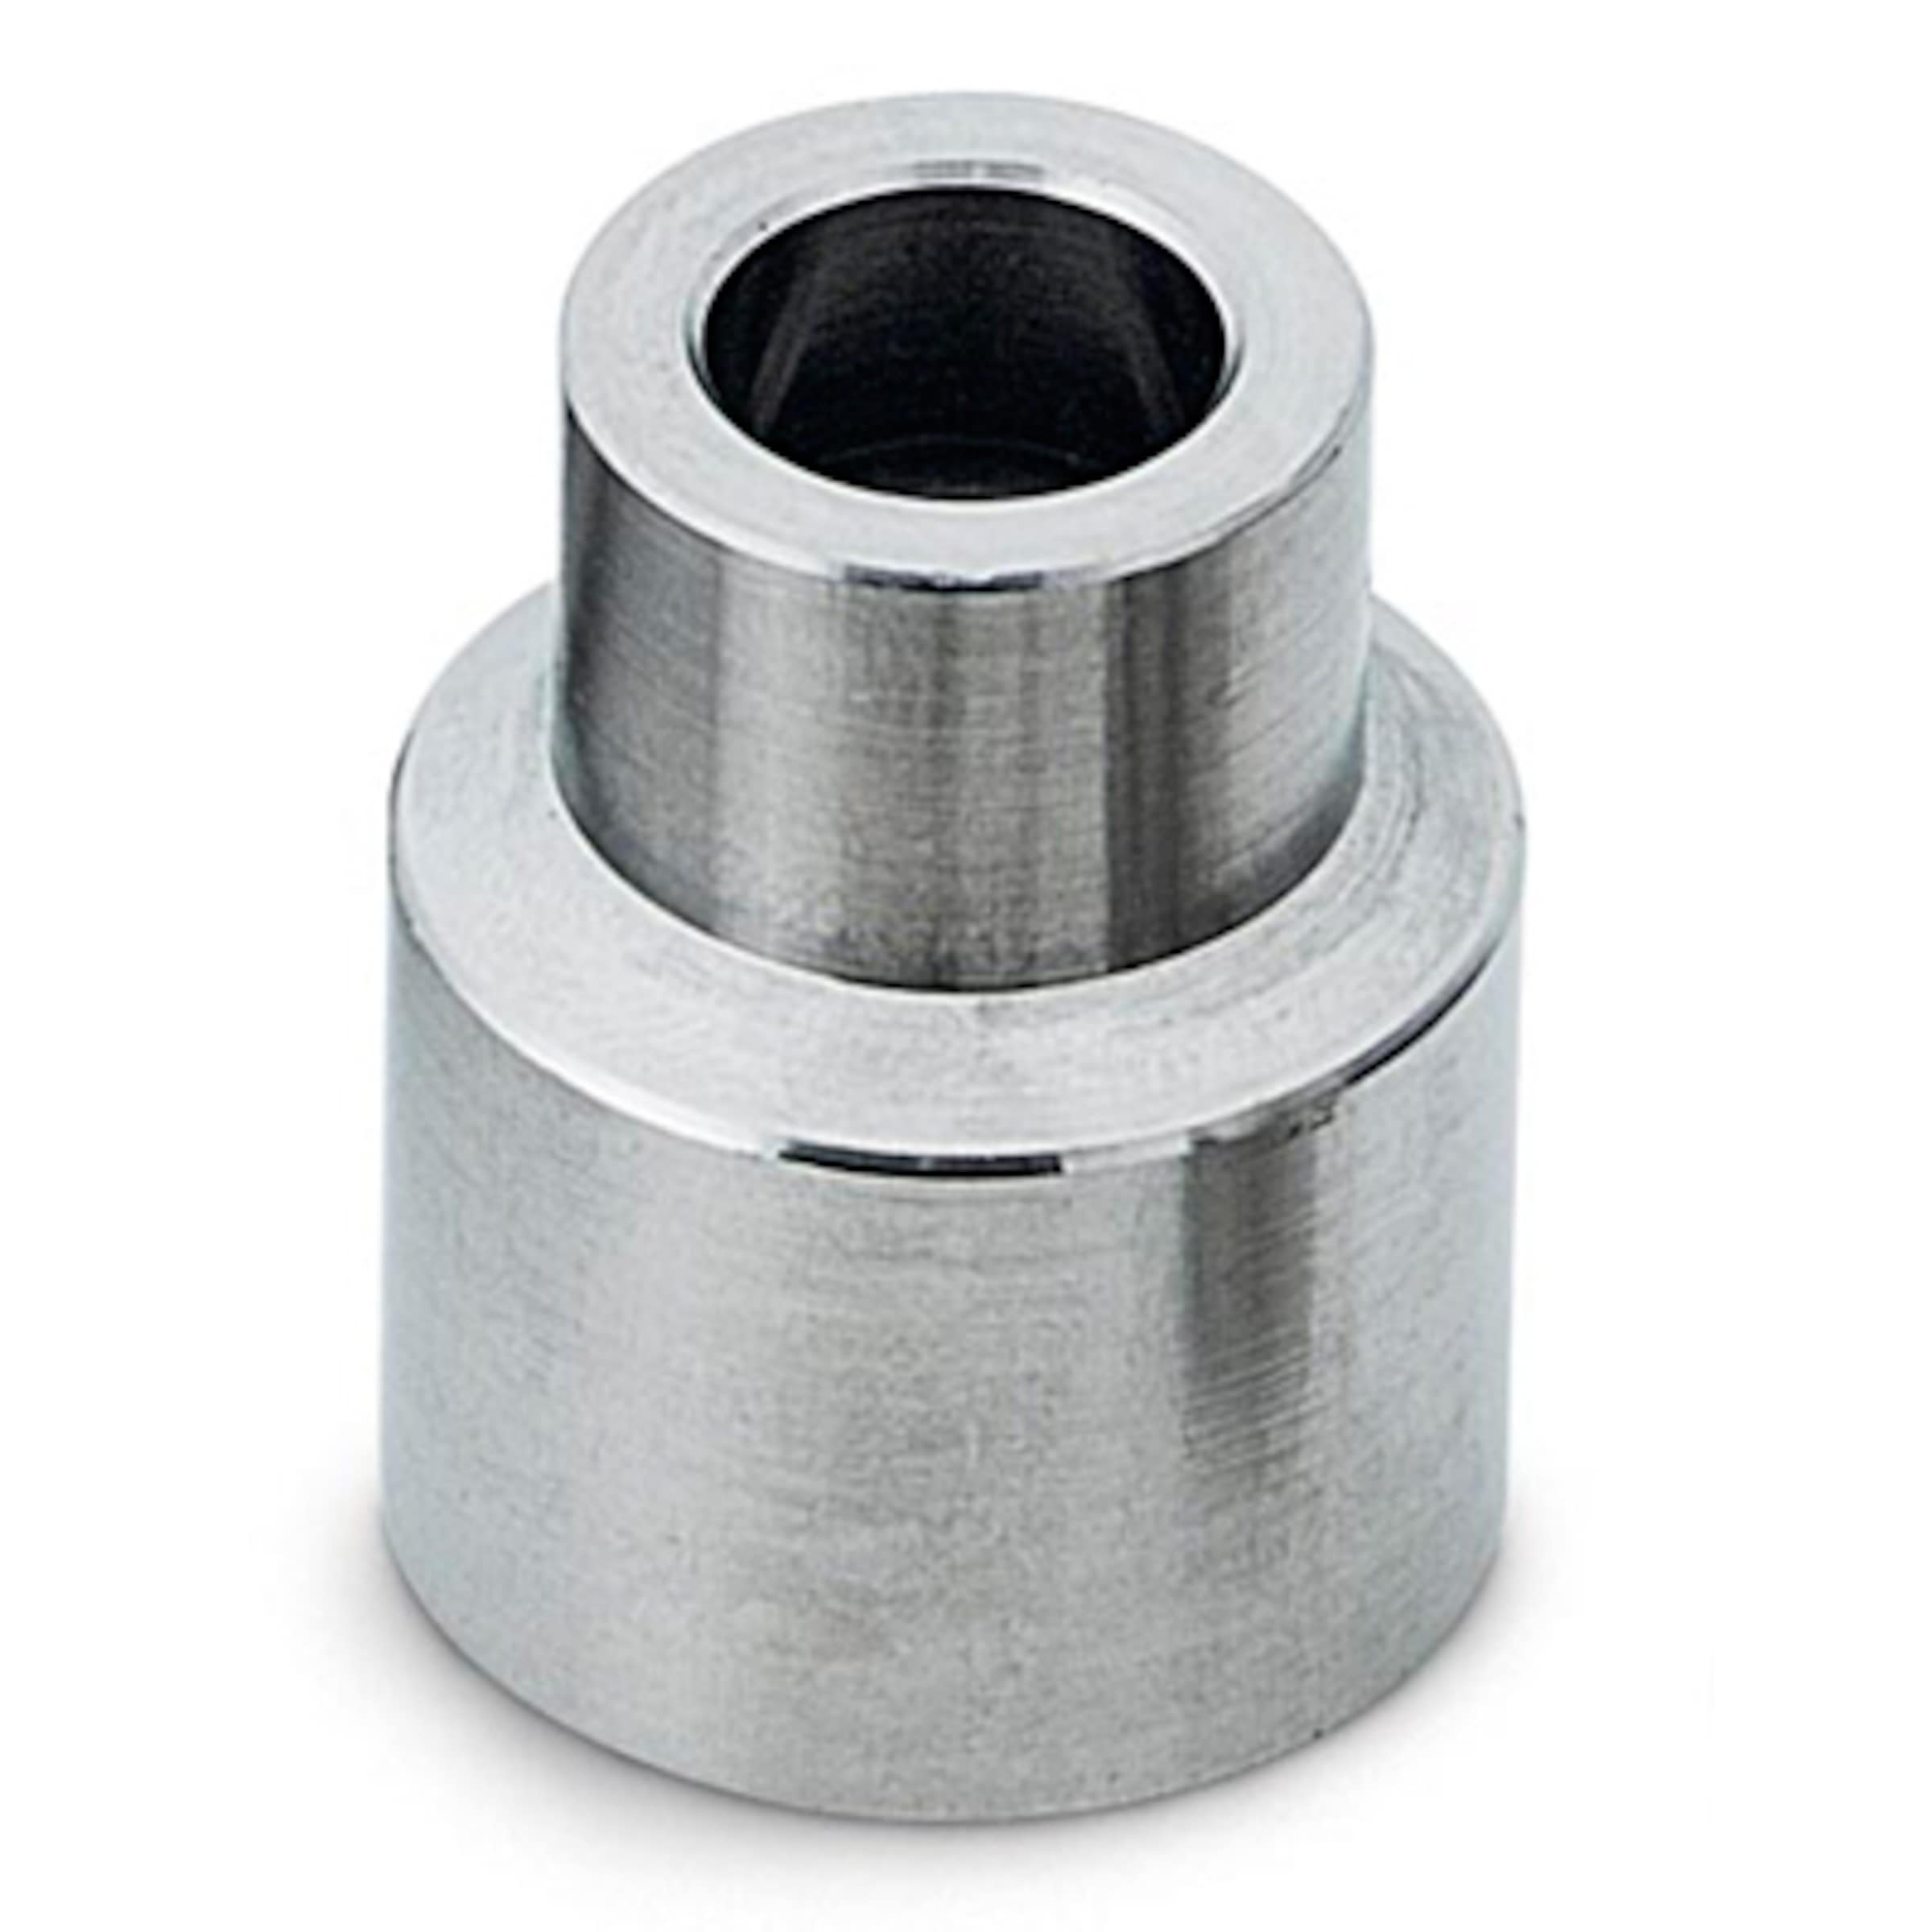 316 Stainless Steel Tube Butt Weld to Tube Socket Weld Adapter, 1/2 in. OD  x 1/4 in. Tube Socket, Weld Adapters, Weld Fittings, Fittings, All  Products